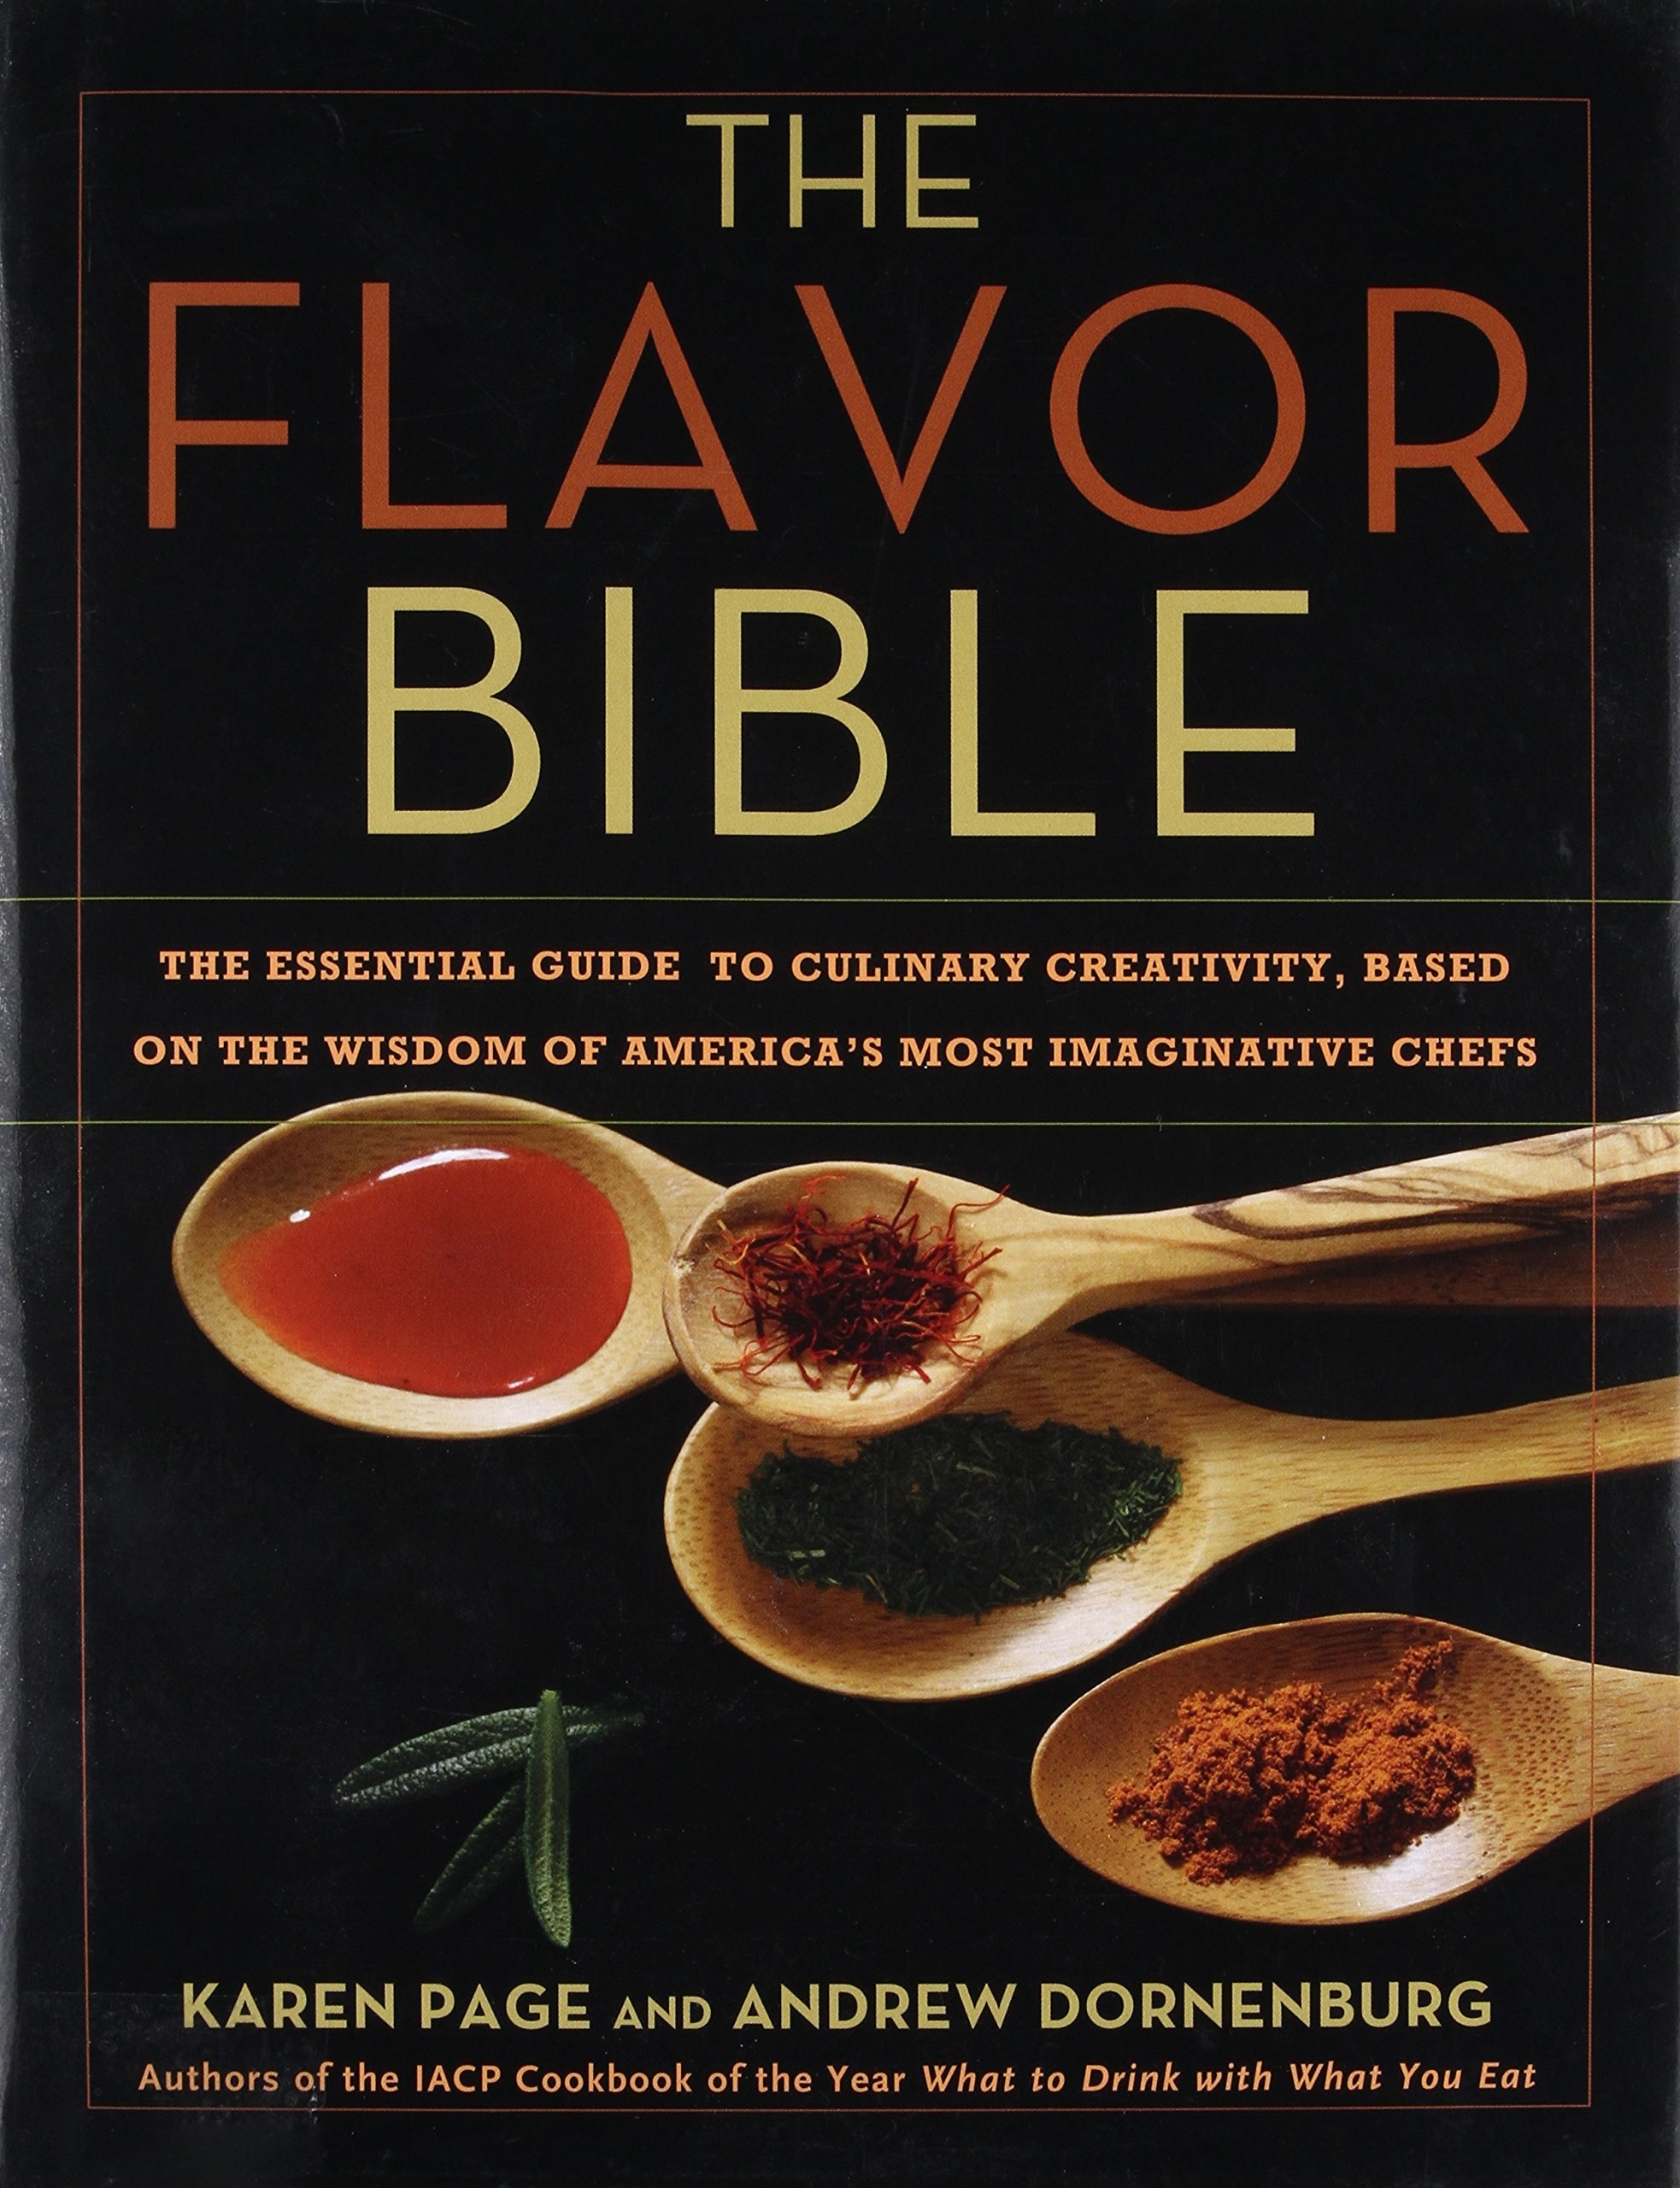 The cover of the The Flavor Bible